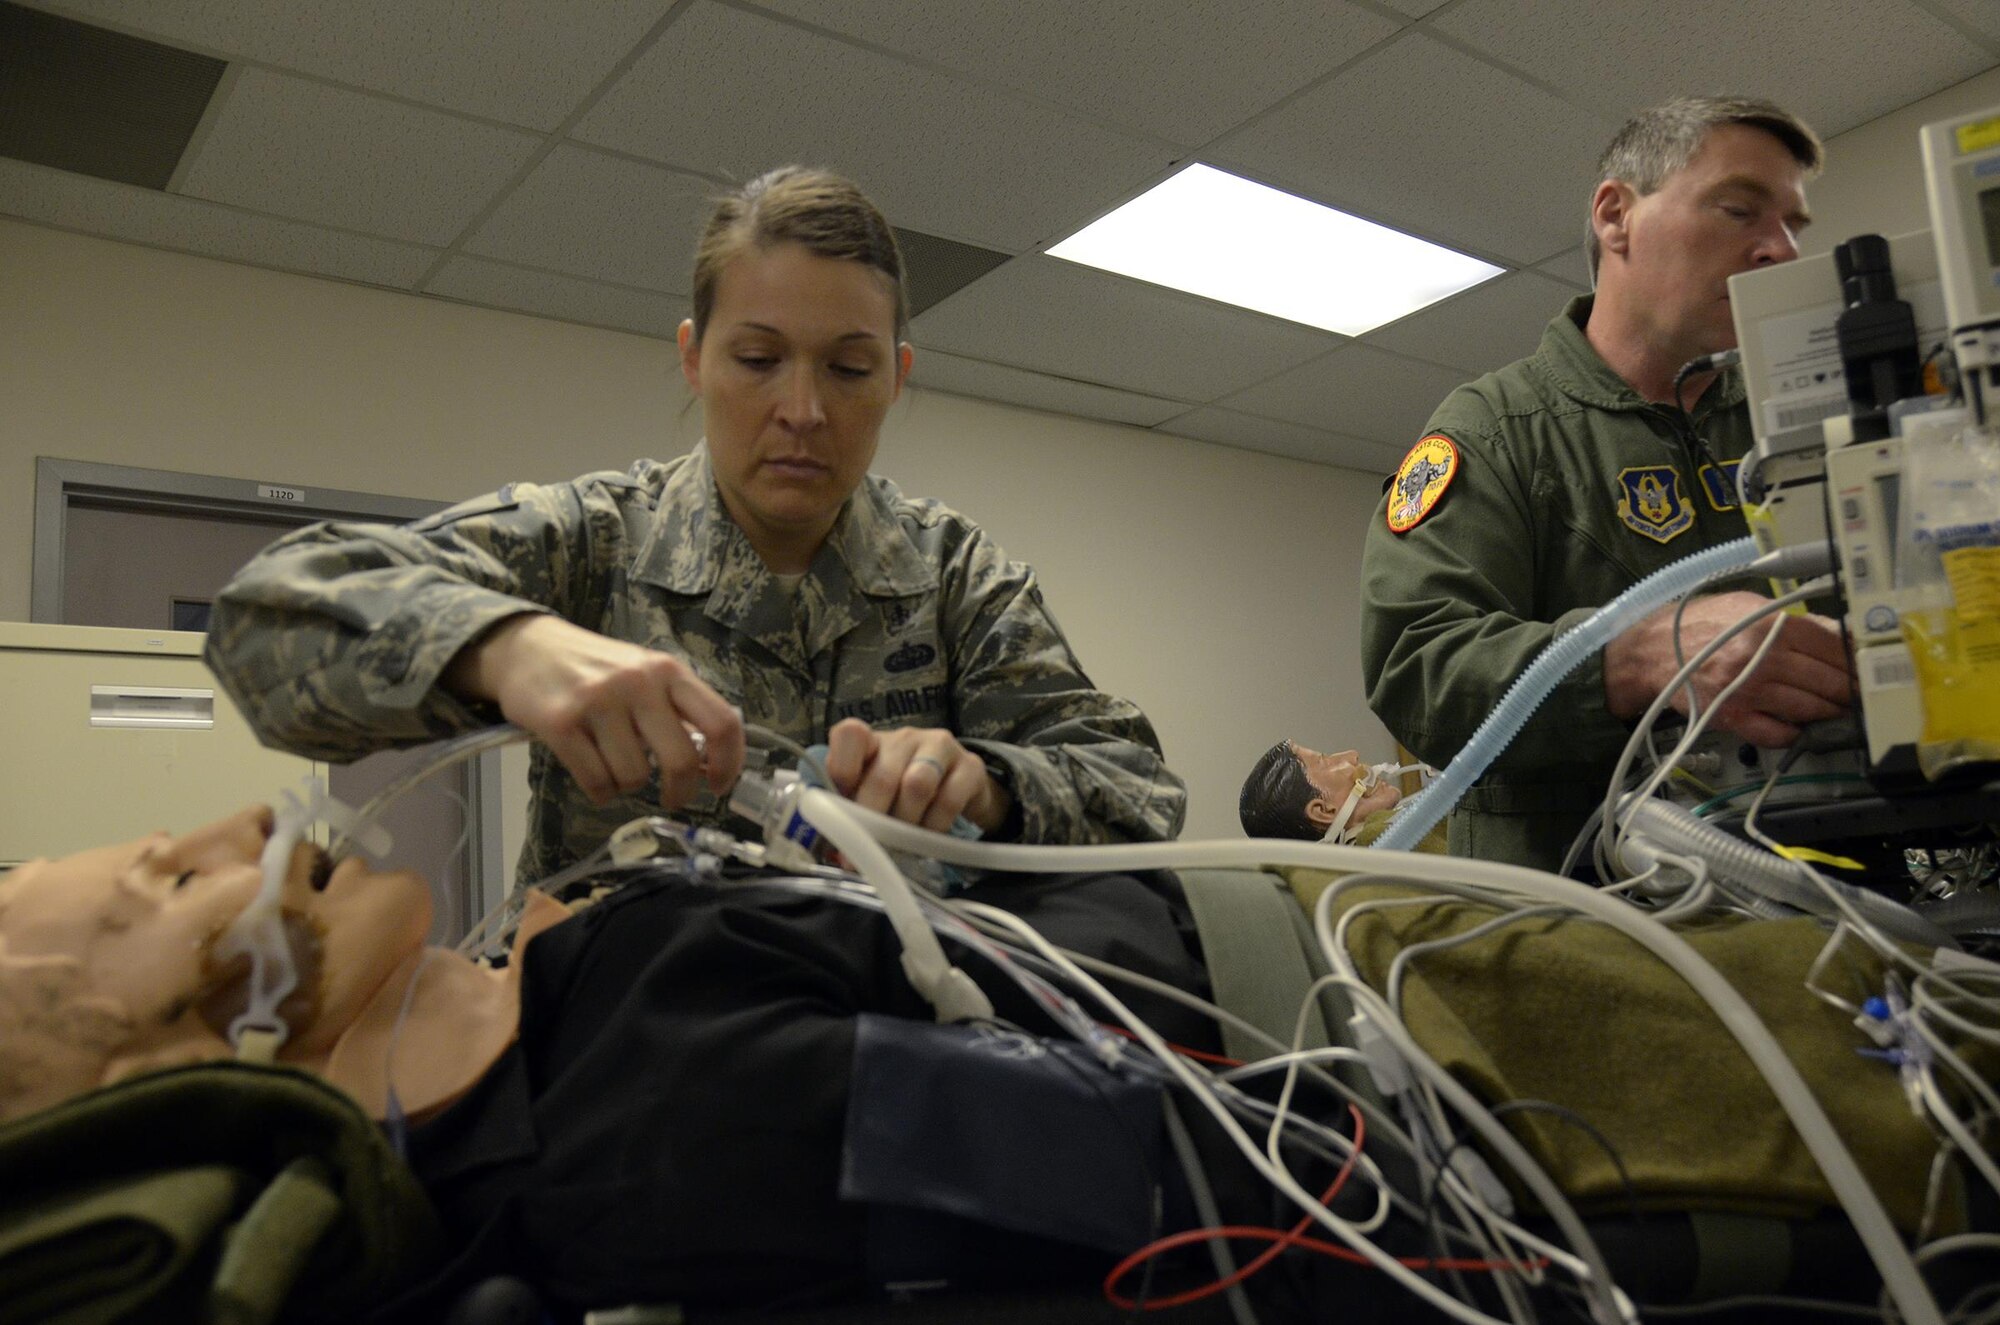 Master Sgts. Jamie Sherman and Larry Combs, both assigned to the respiratory section of the Critical Care Air Transport Team, 445th Aeromedical Staging Squadron, prepare a notional patient for transportation during a home station exercise on April 1, 2017. The two members tape down cables and tubes to make sure patients are easily and safely transported. (U.S. Air Force photo/Staff Sgt. Joel McCullough)